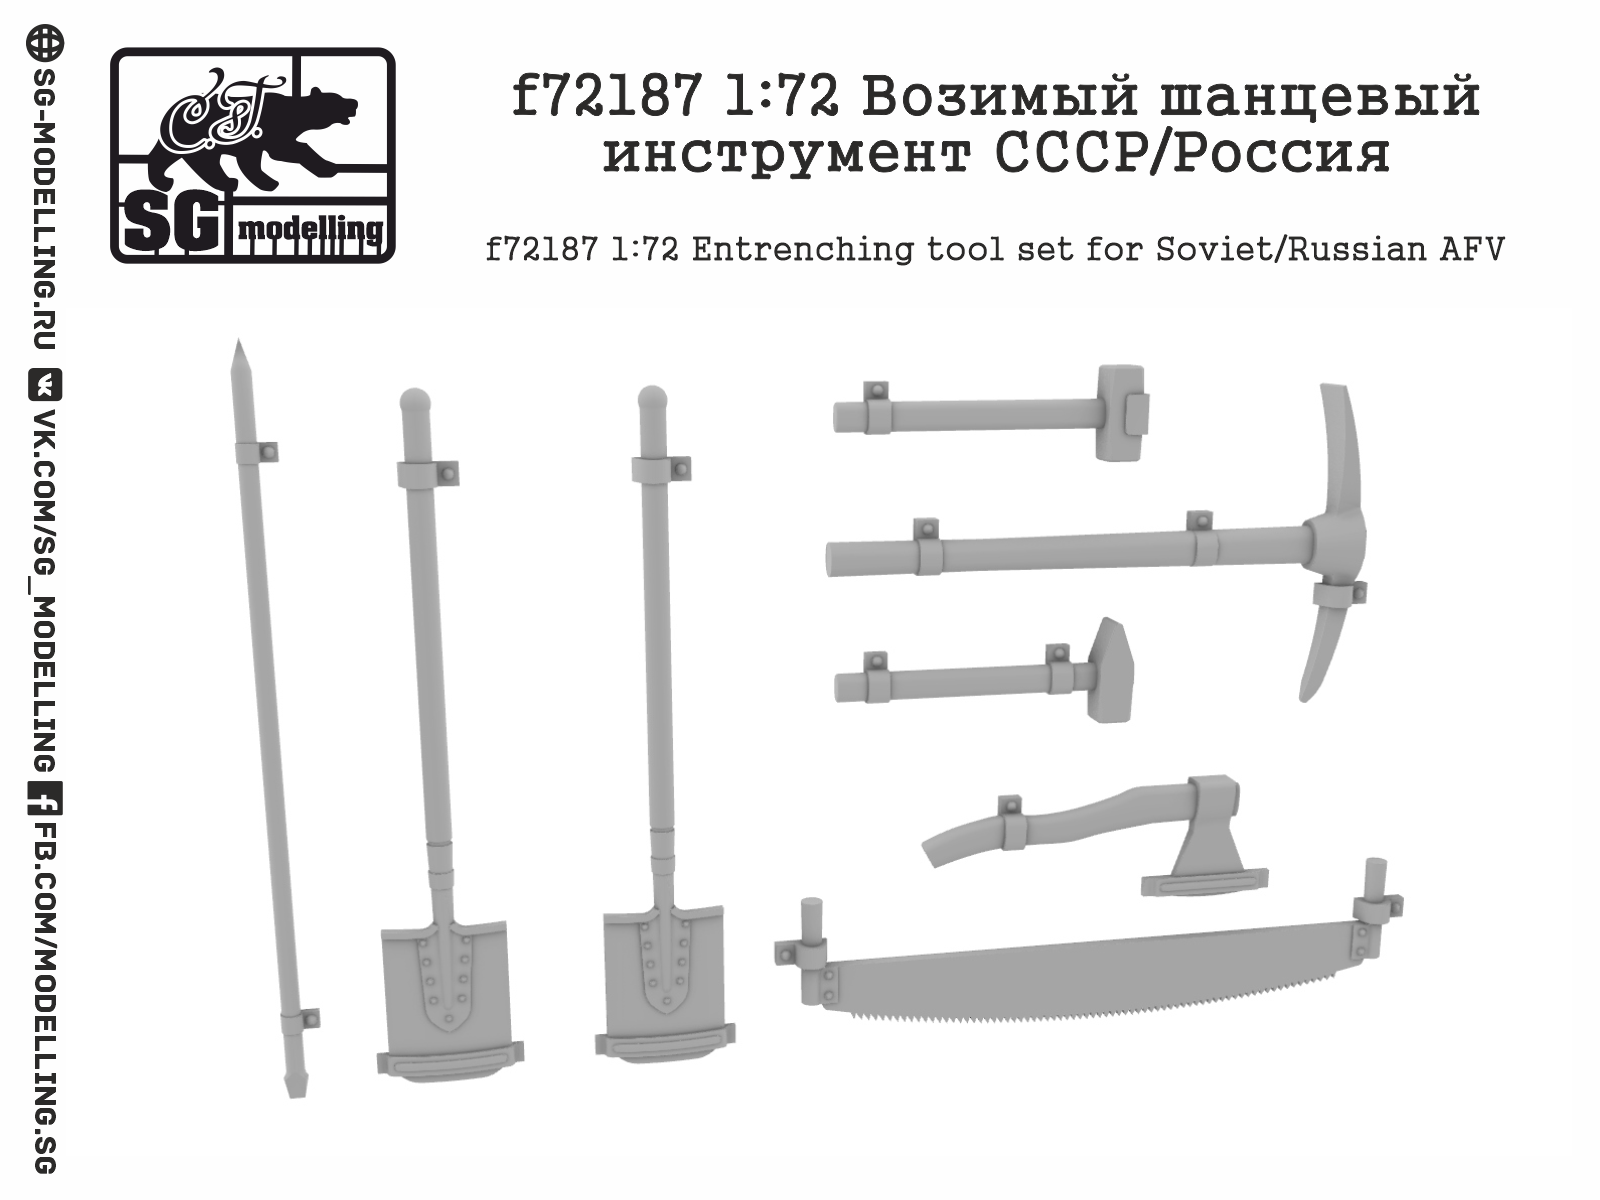 Soviet / Russian AFV entrenching tools